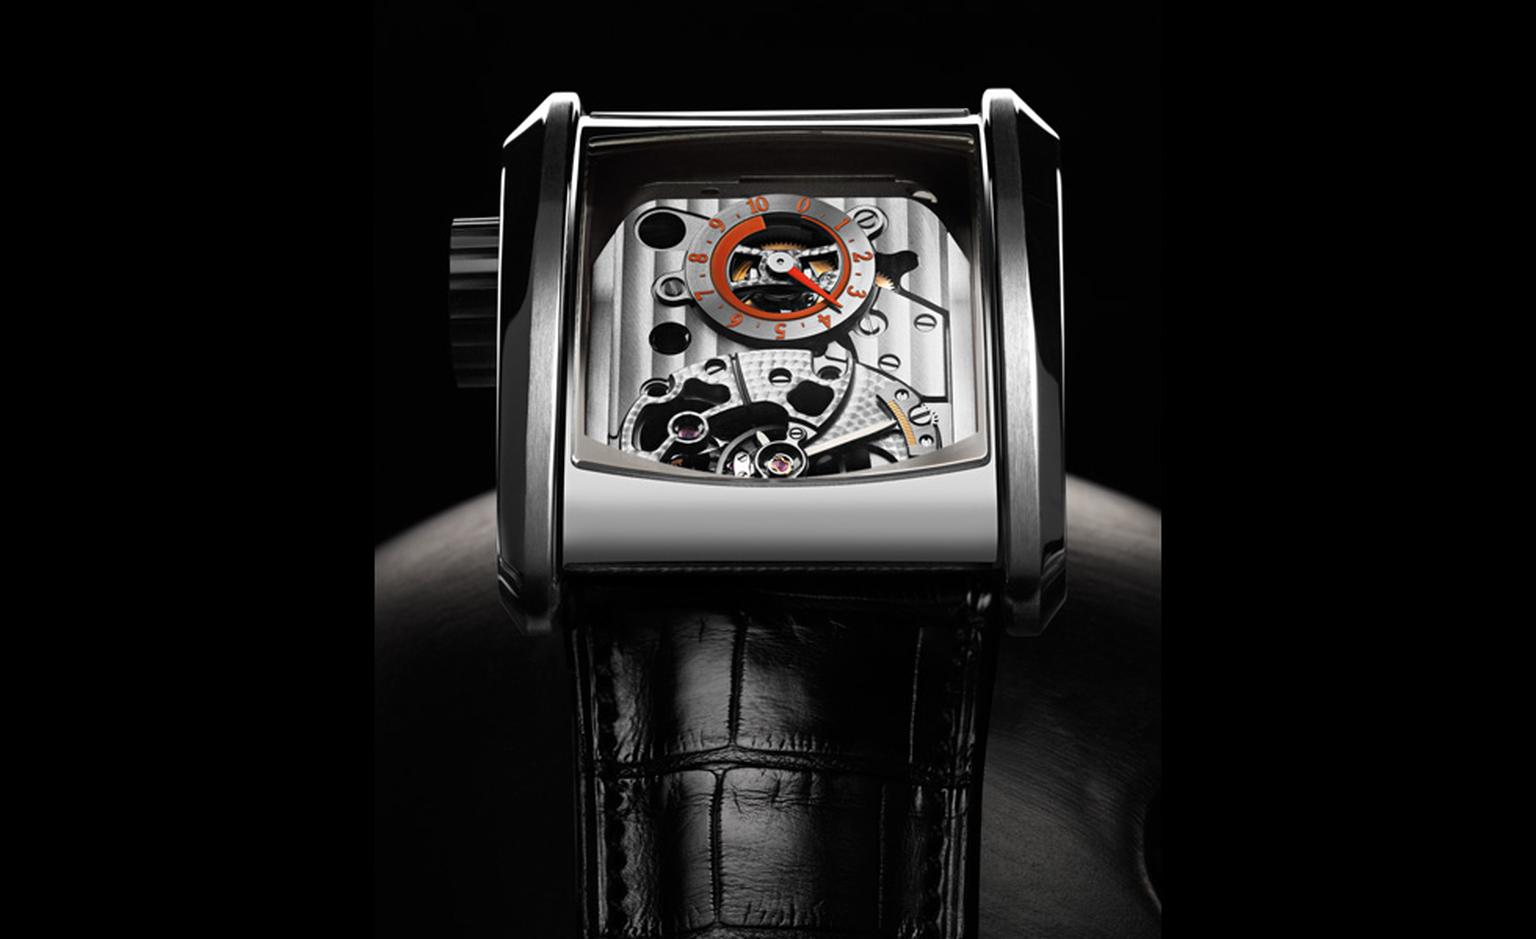 Movement of the Parmigiani Fleurier Bugatti Super Sport visible through the top of the watch.